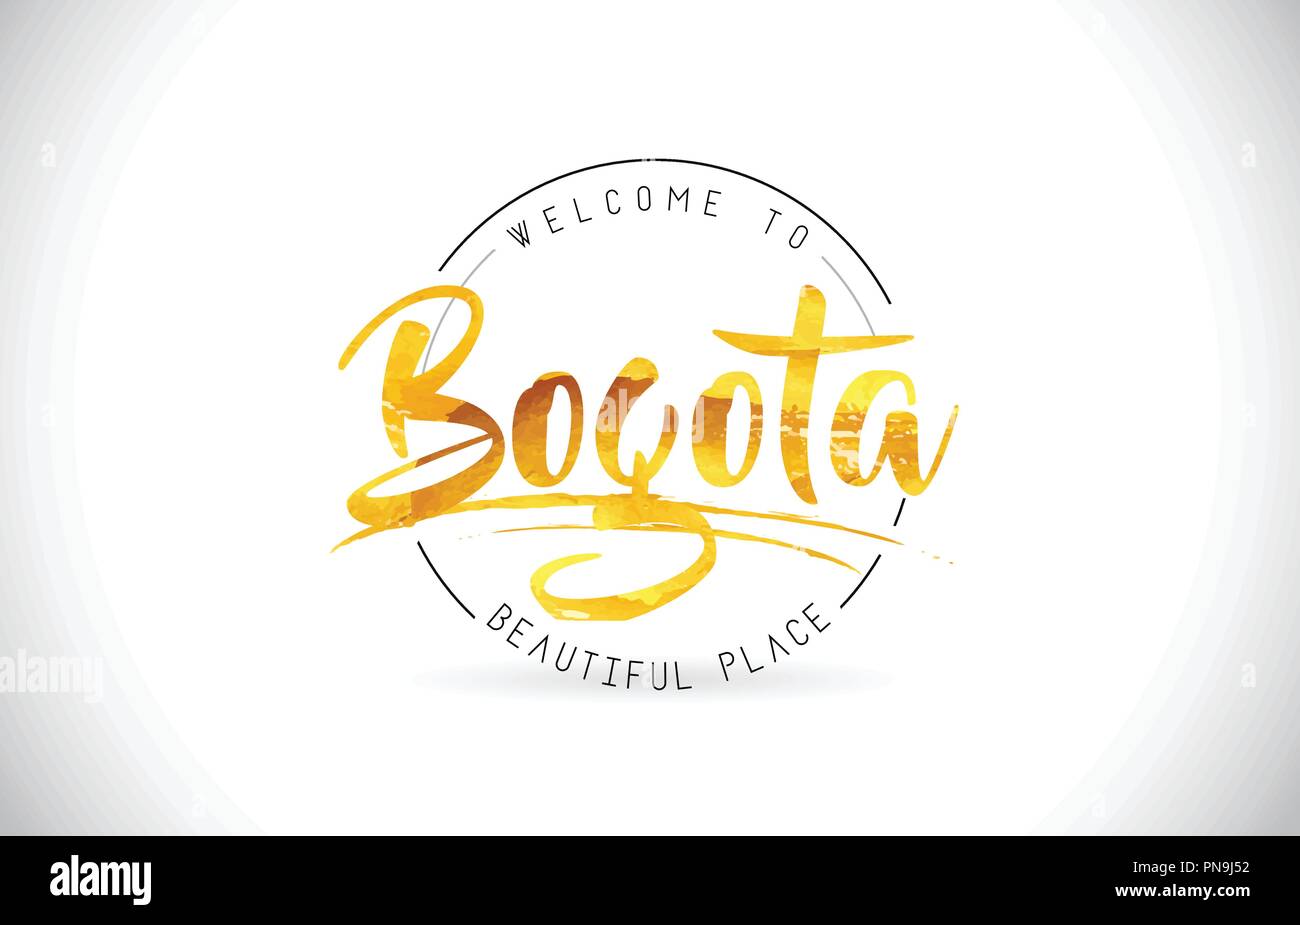 Bogota Welcome To Word Text with Handwritten Font and Golden Texture Design Illustration Vector. Stock Vector